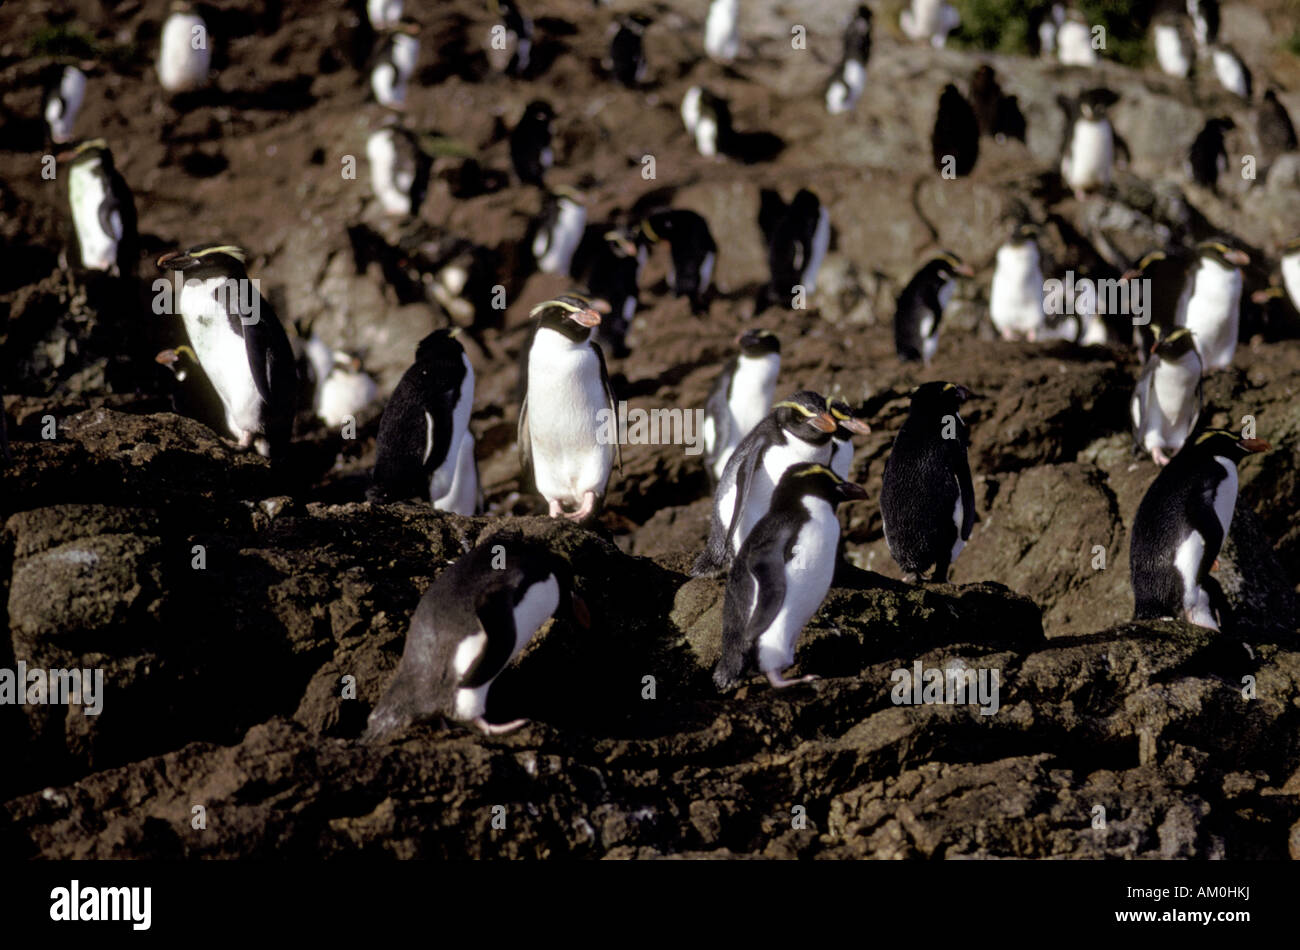 New Zealand, Sub-Antarctic Islands, Snares Island, Snares Penguin (Eudyptes robustus), also known as the Snares Crested Penguin. Stock Photo